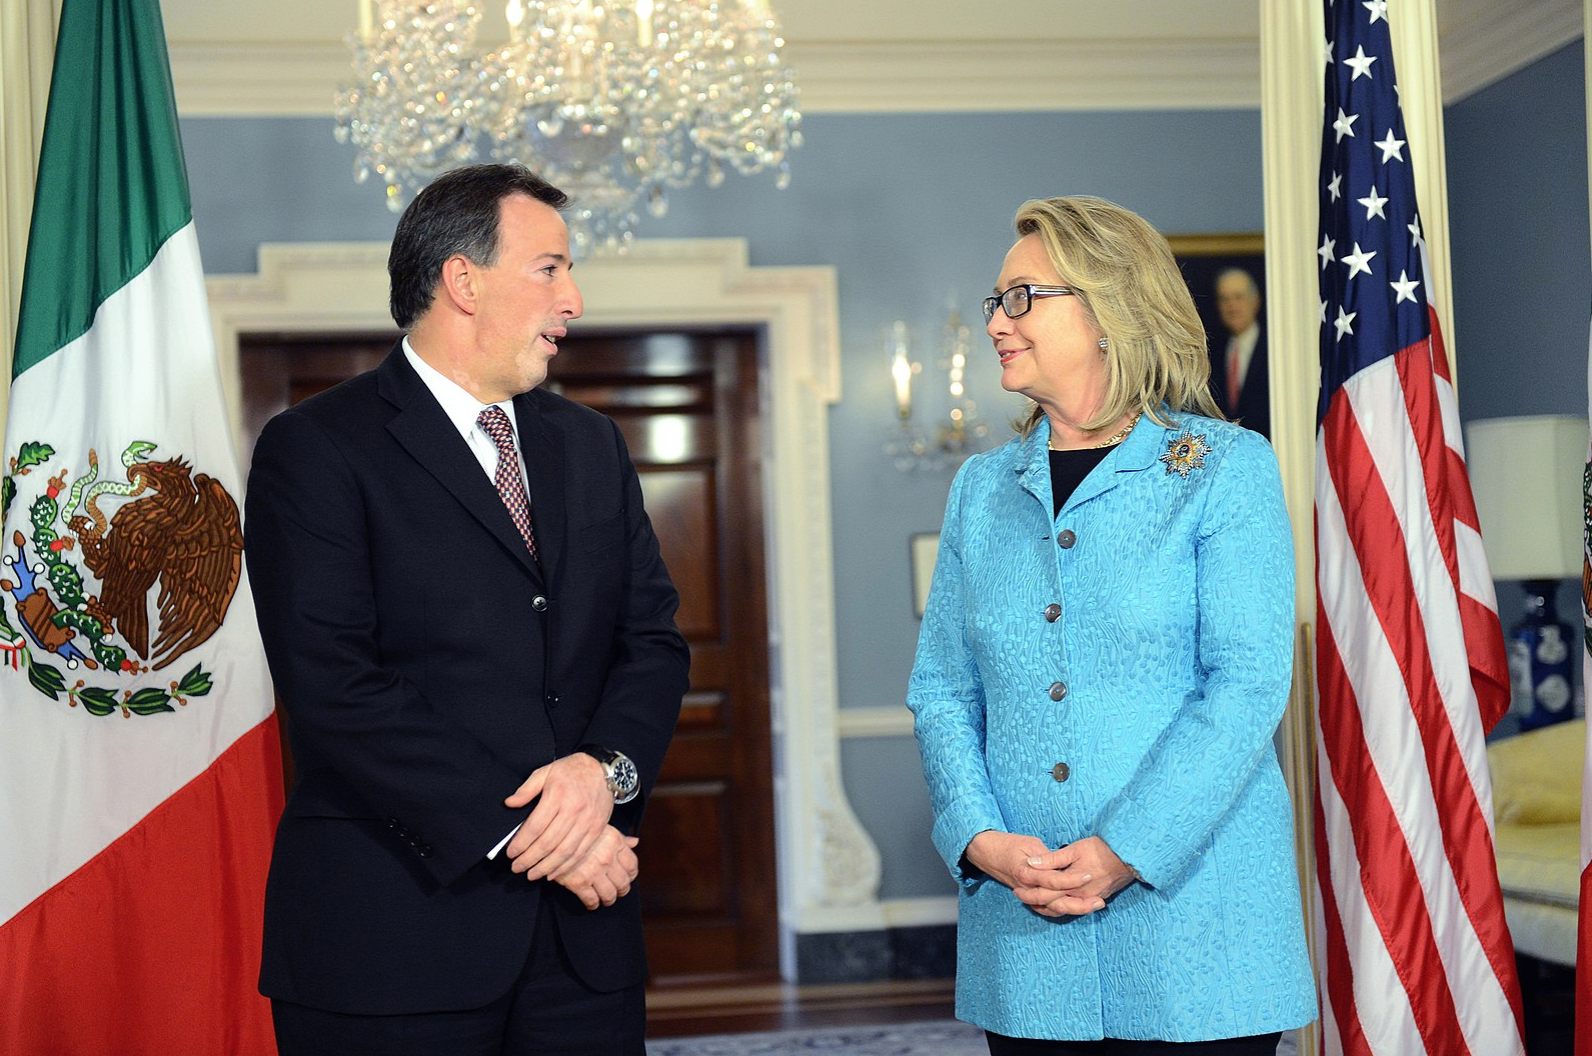 U.S. Secretary of State Hillary Rodham Clinton meets with Mexican Foreign Secretary Jose Antonio Meade at the U.S. Department of State in Washington, D.C., January 30, 2013. Image credit: Wikicommons/ U.S. Department of State.